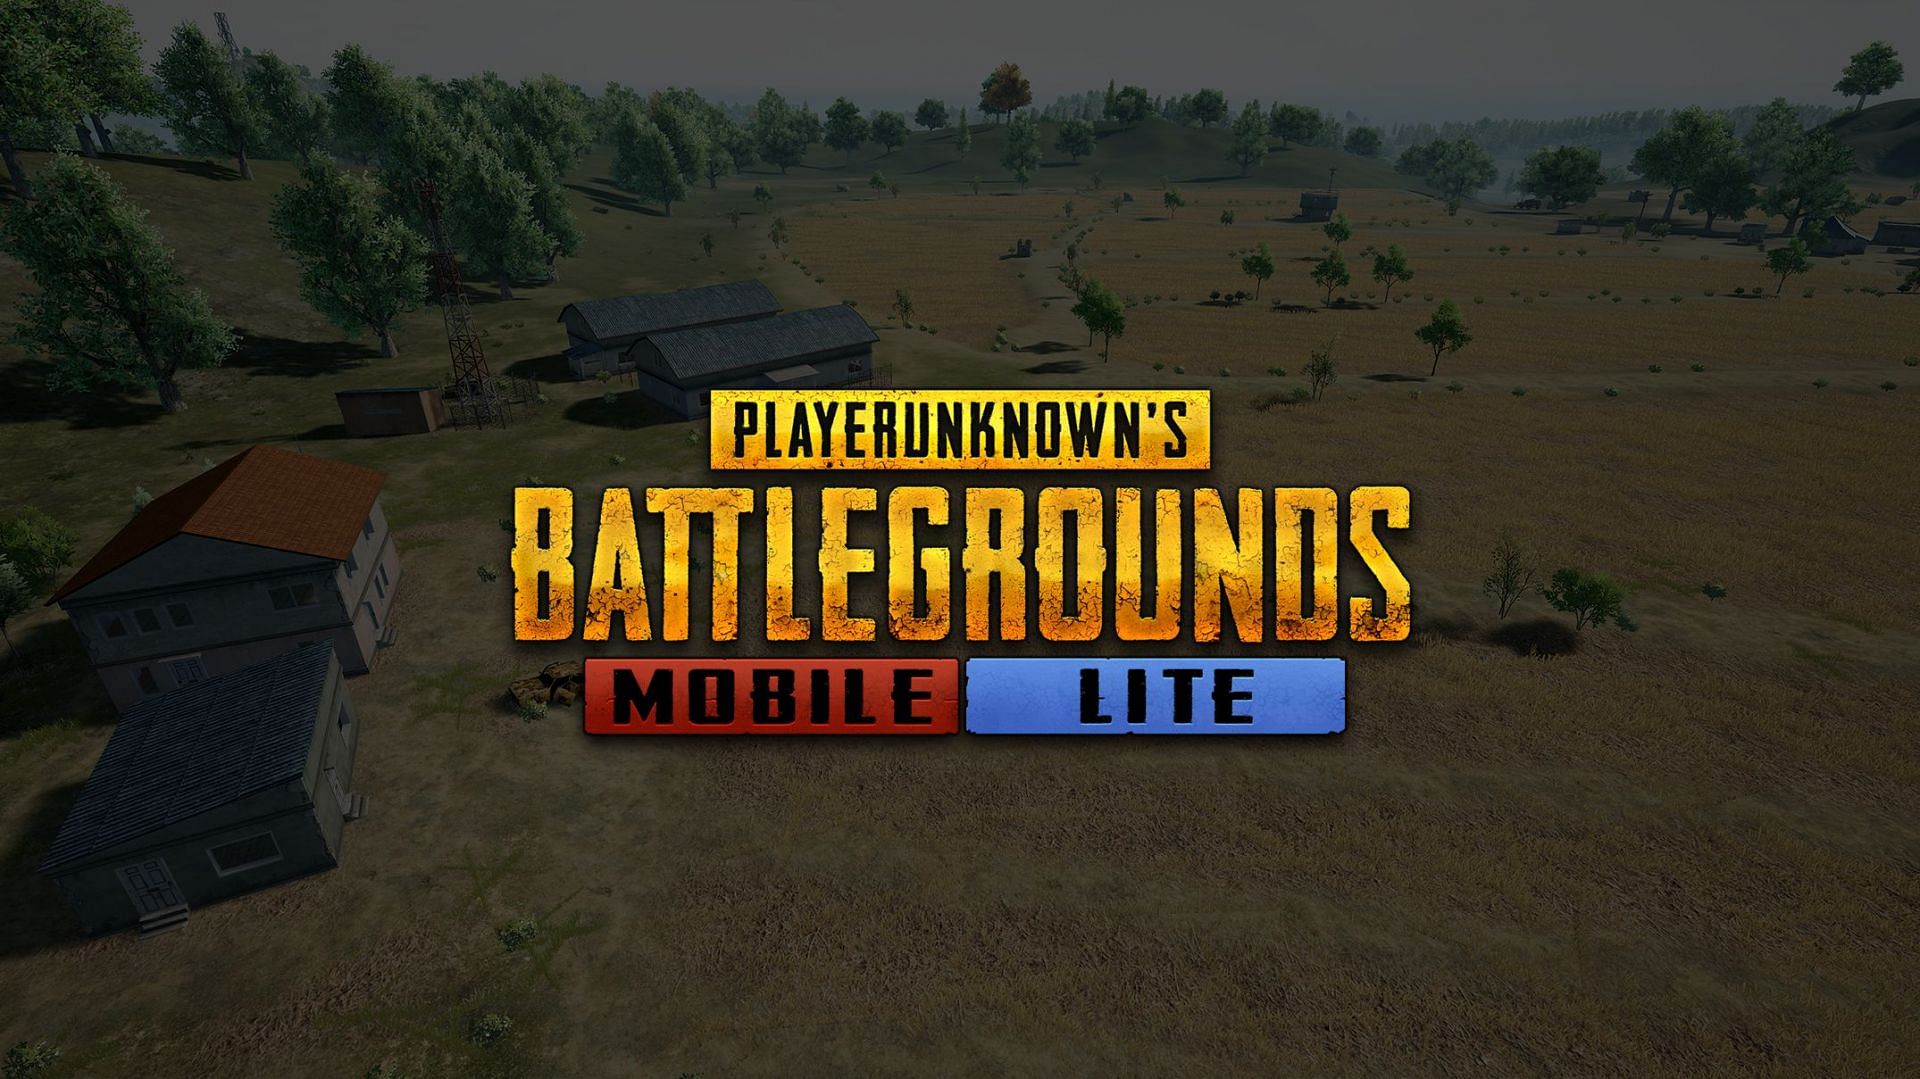 PUBG Mobile Lite new 0.22.1 update APK download link for low-end android devices